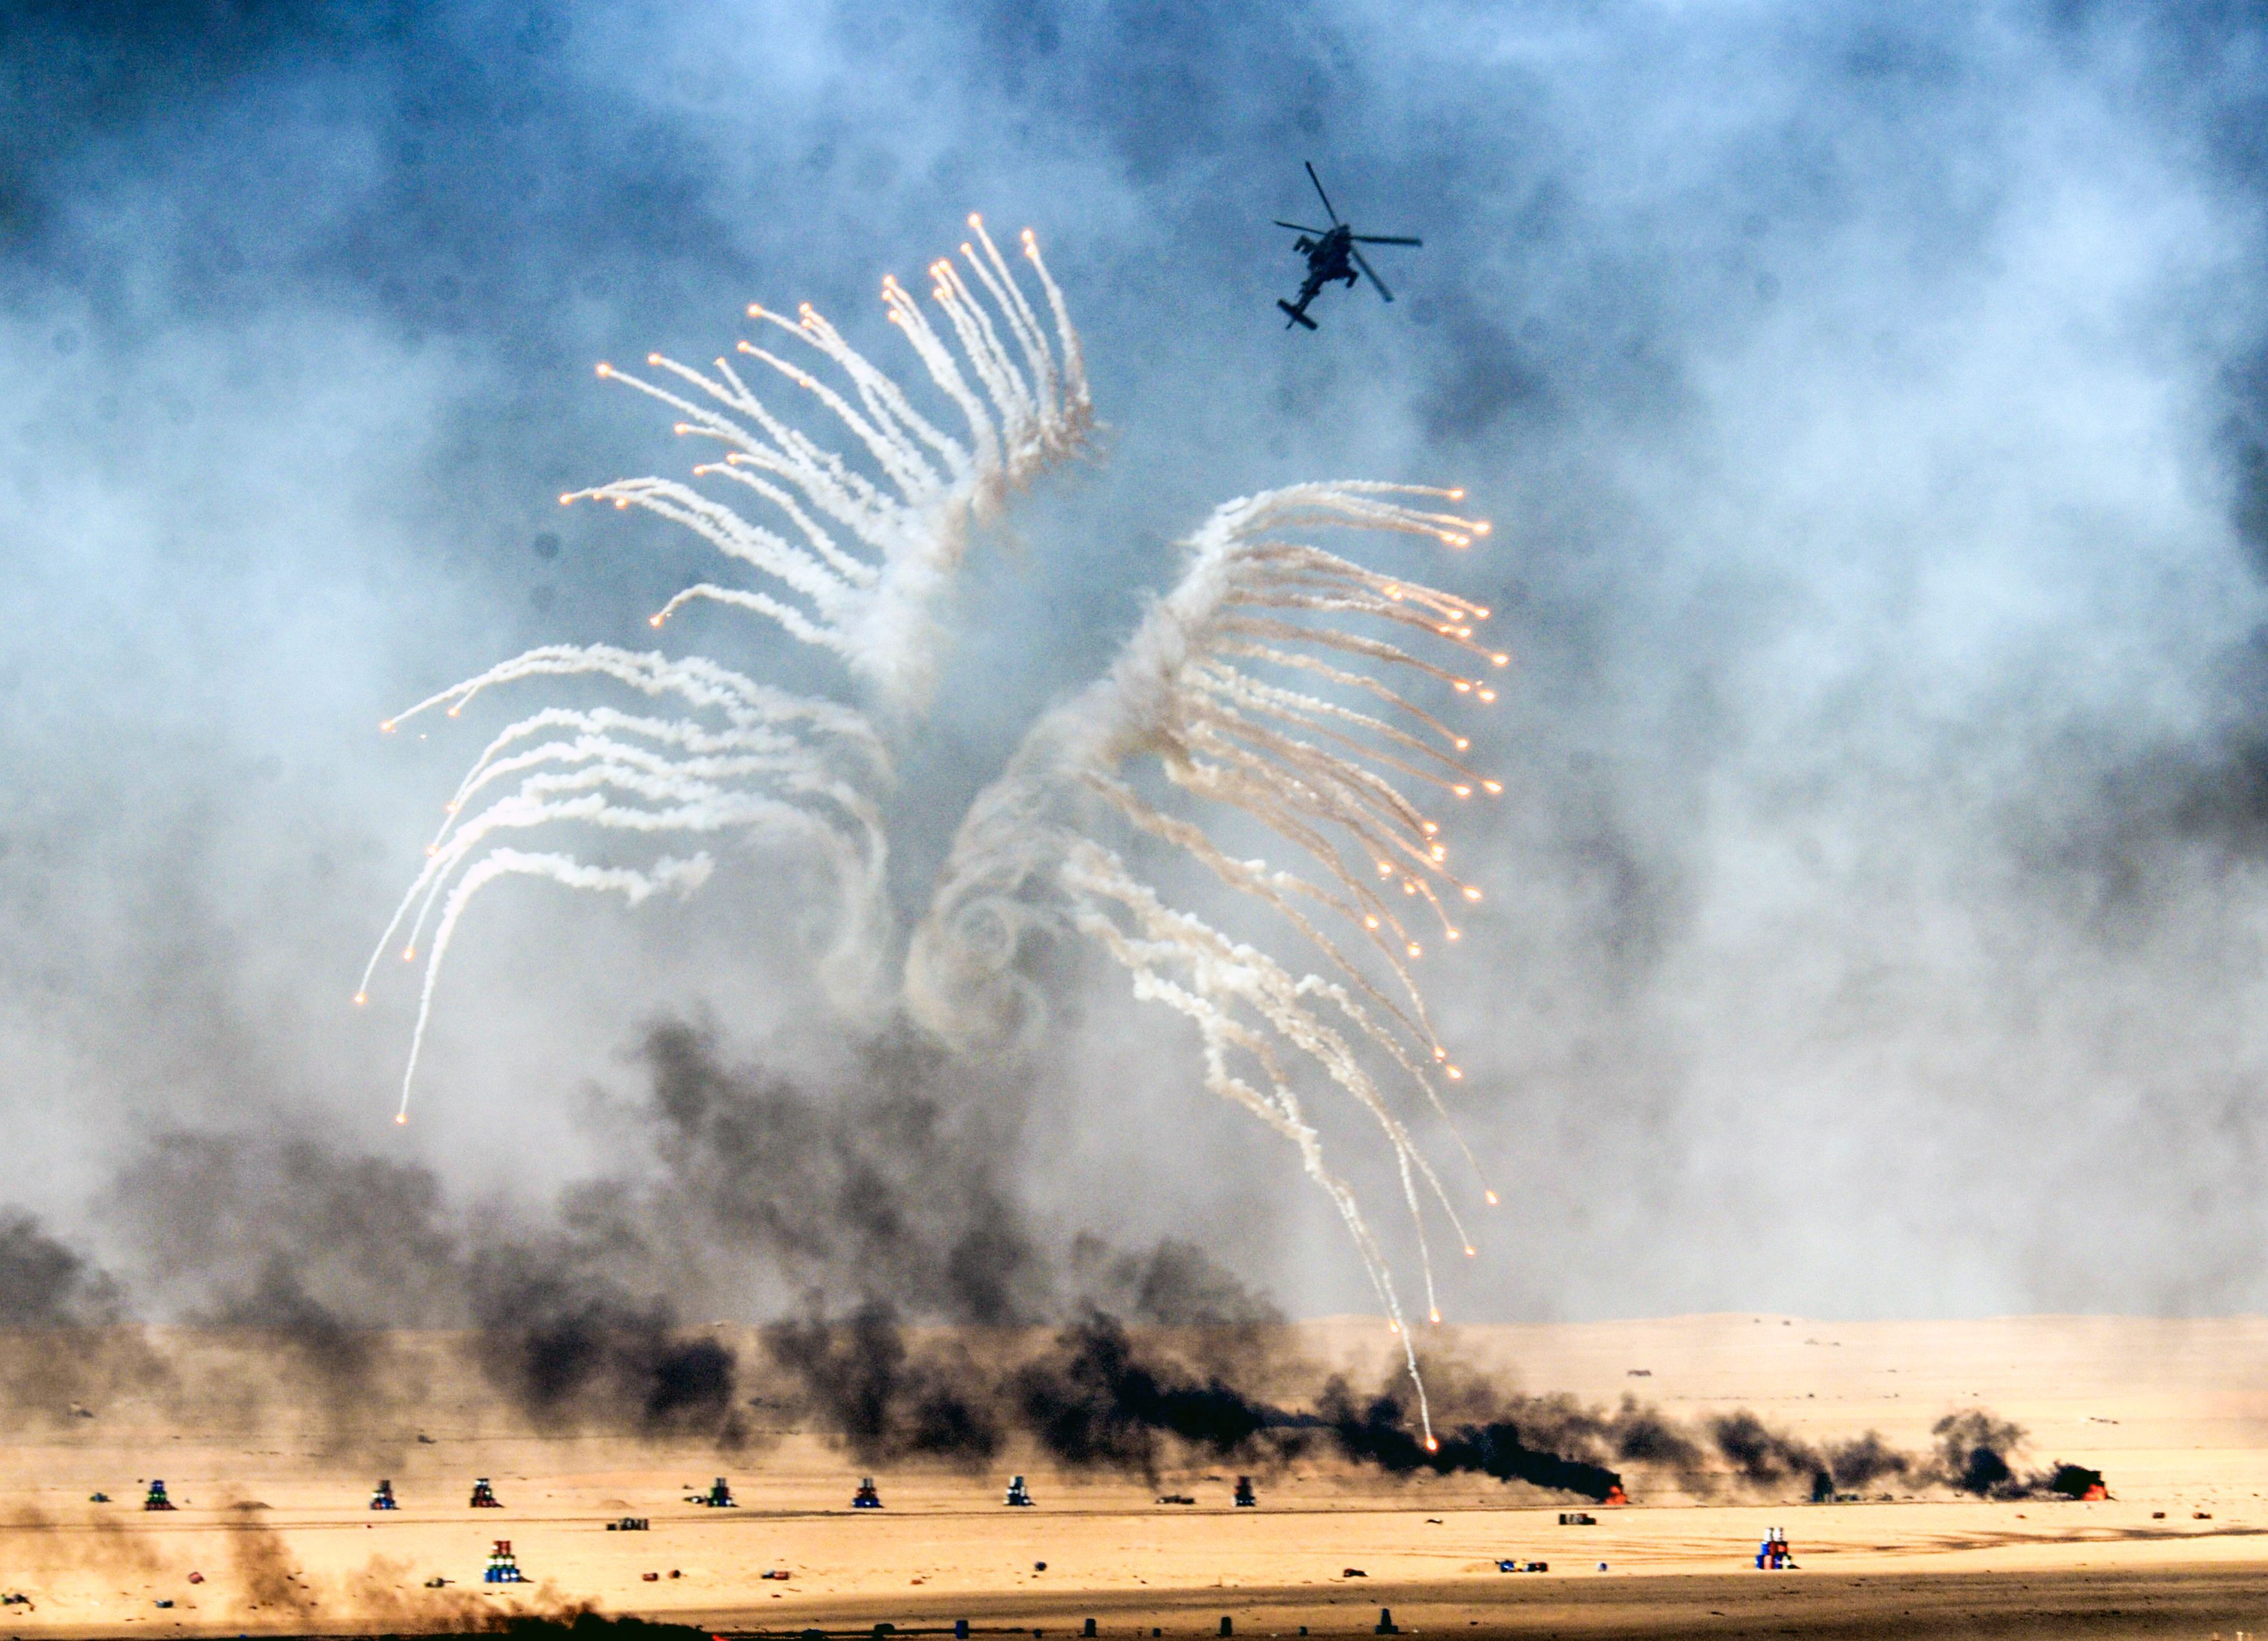 TOPSHOT - A Kuwaiti military helicopter takes part in a live ammunition military exercise at Udaira military range, 140 km north of Kuwait City, on January 17, 2017. / AFP PHOTO / Yasser Al-Zayyat / TT / kod 444